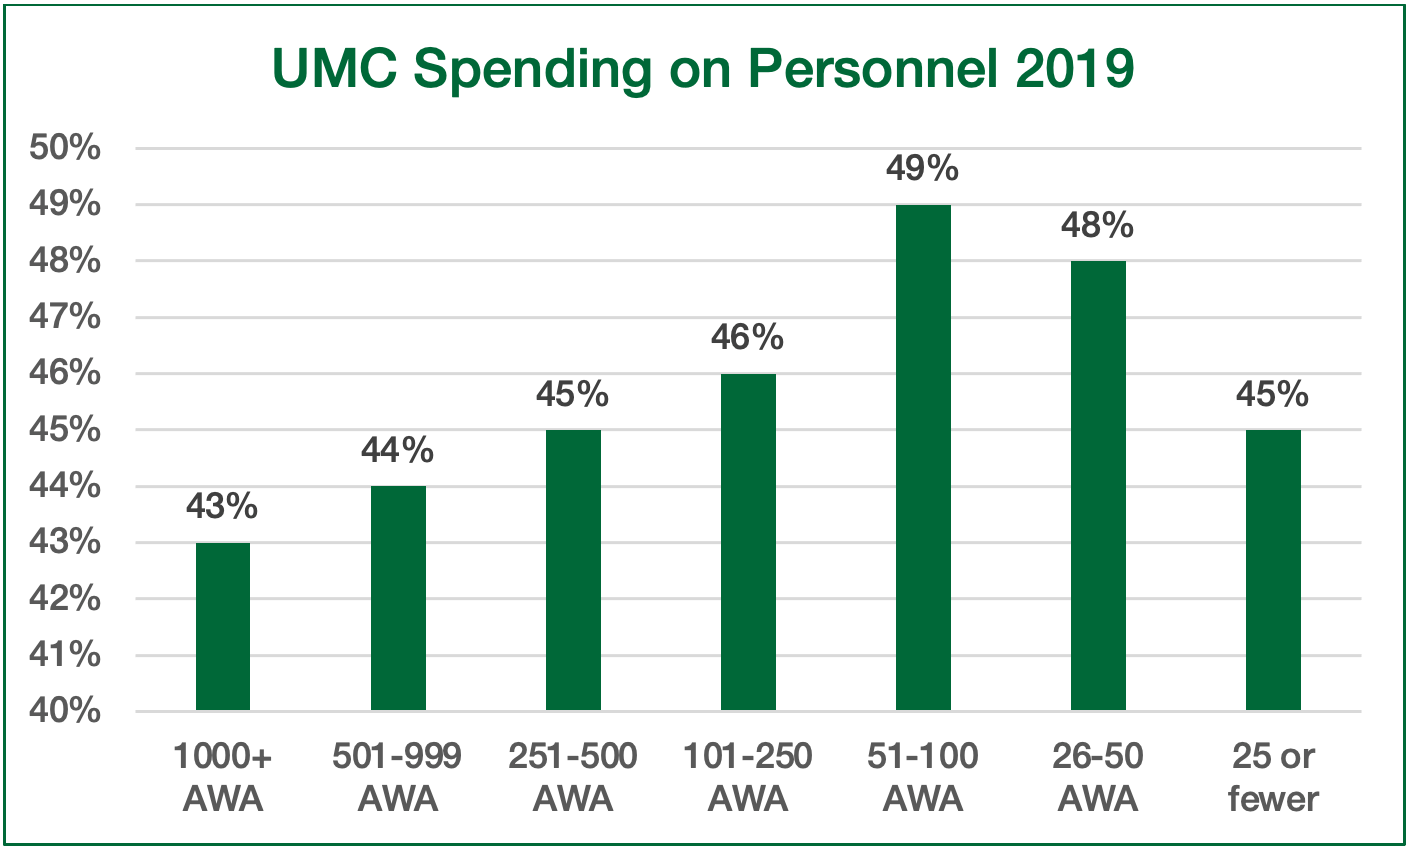 UMC Spending on Personnel 2019 graph